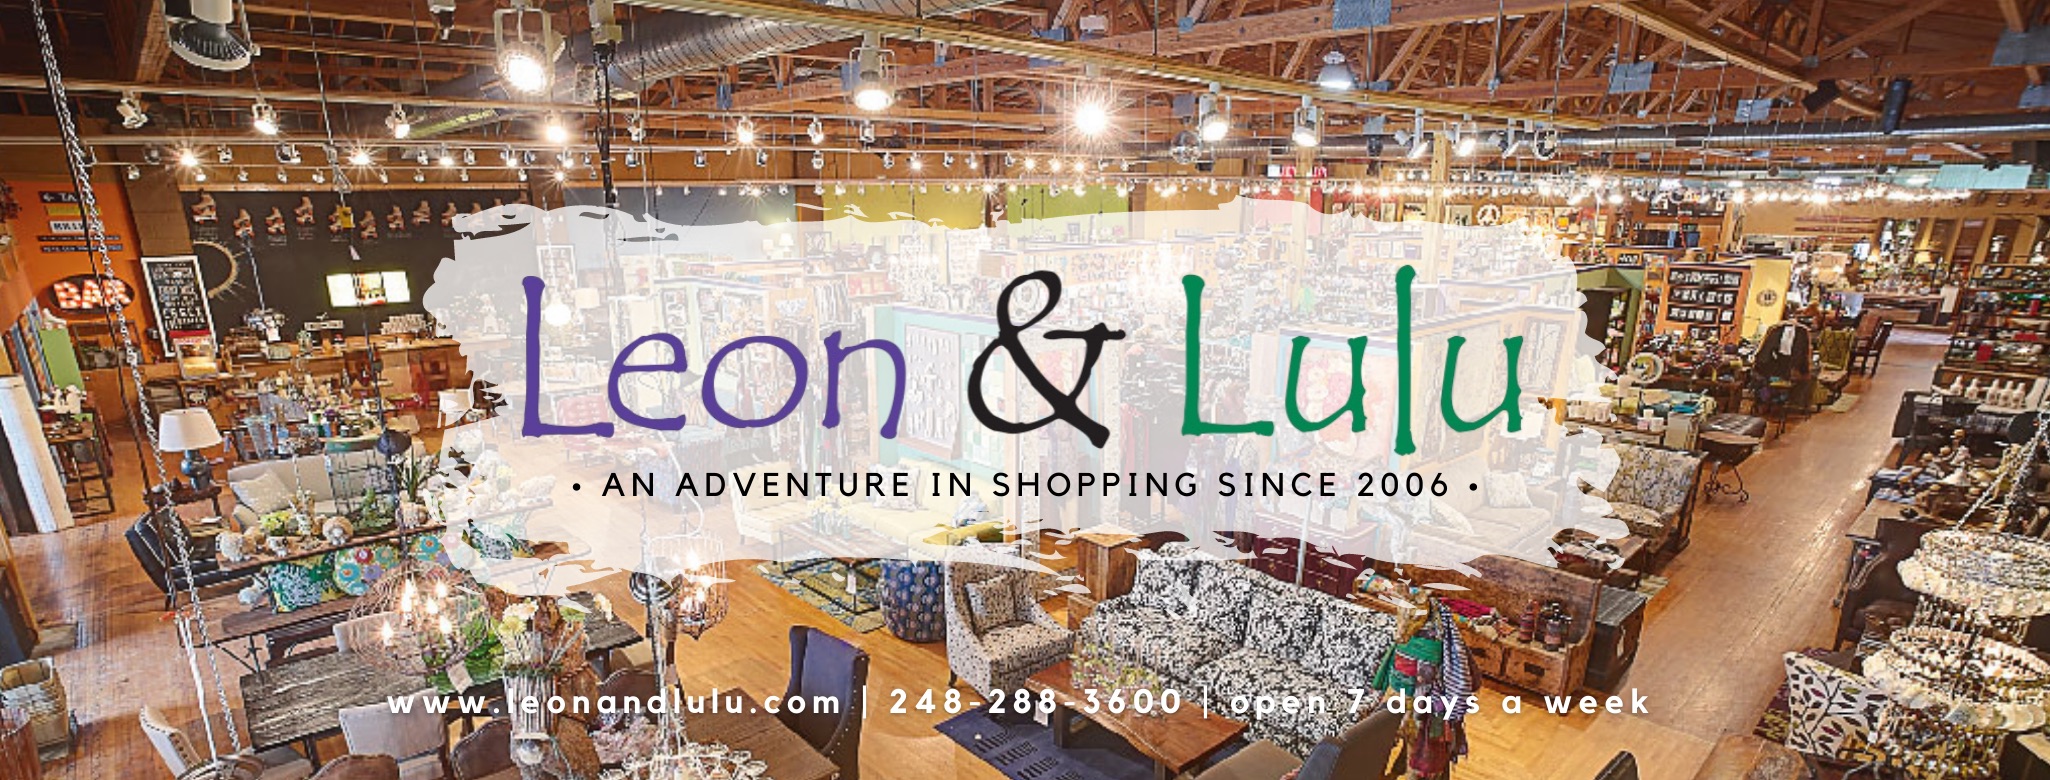 Discover the charm of Leon & Lulu, nestled within Michigan's historic landmarks.